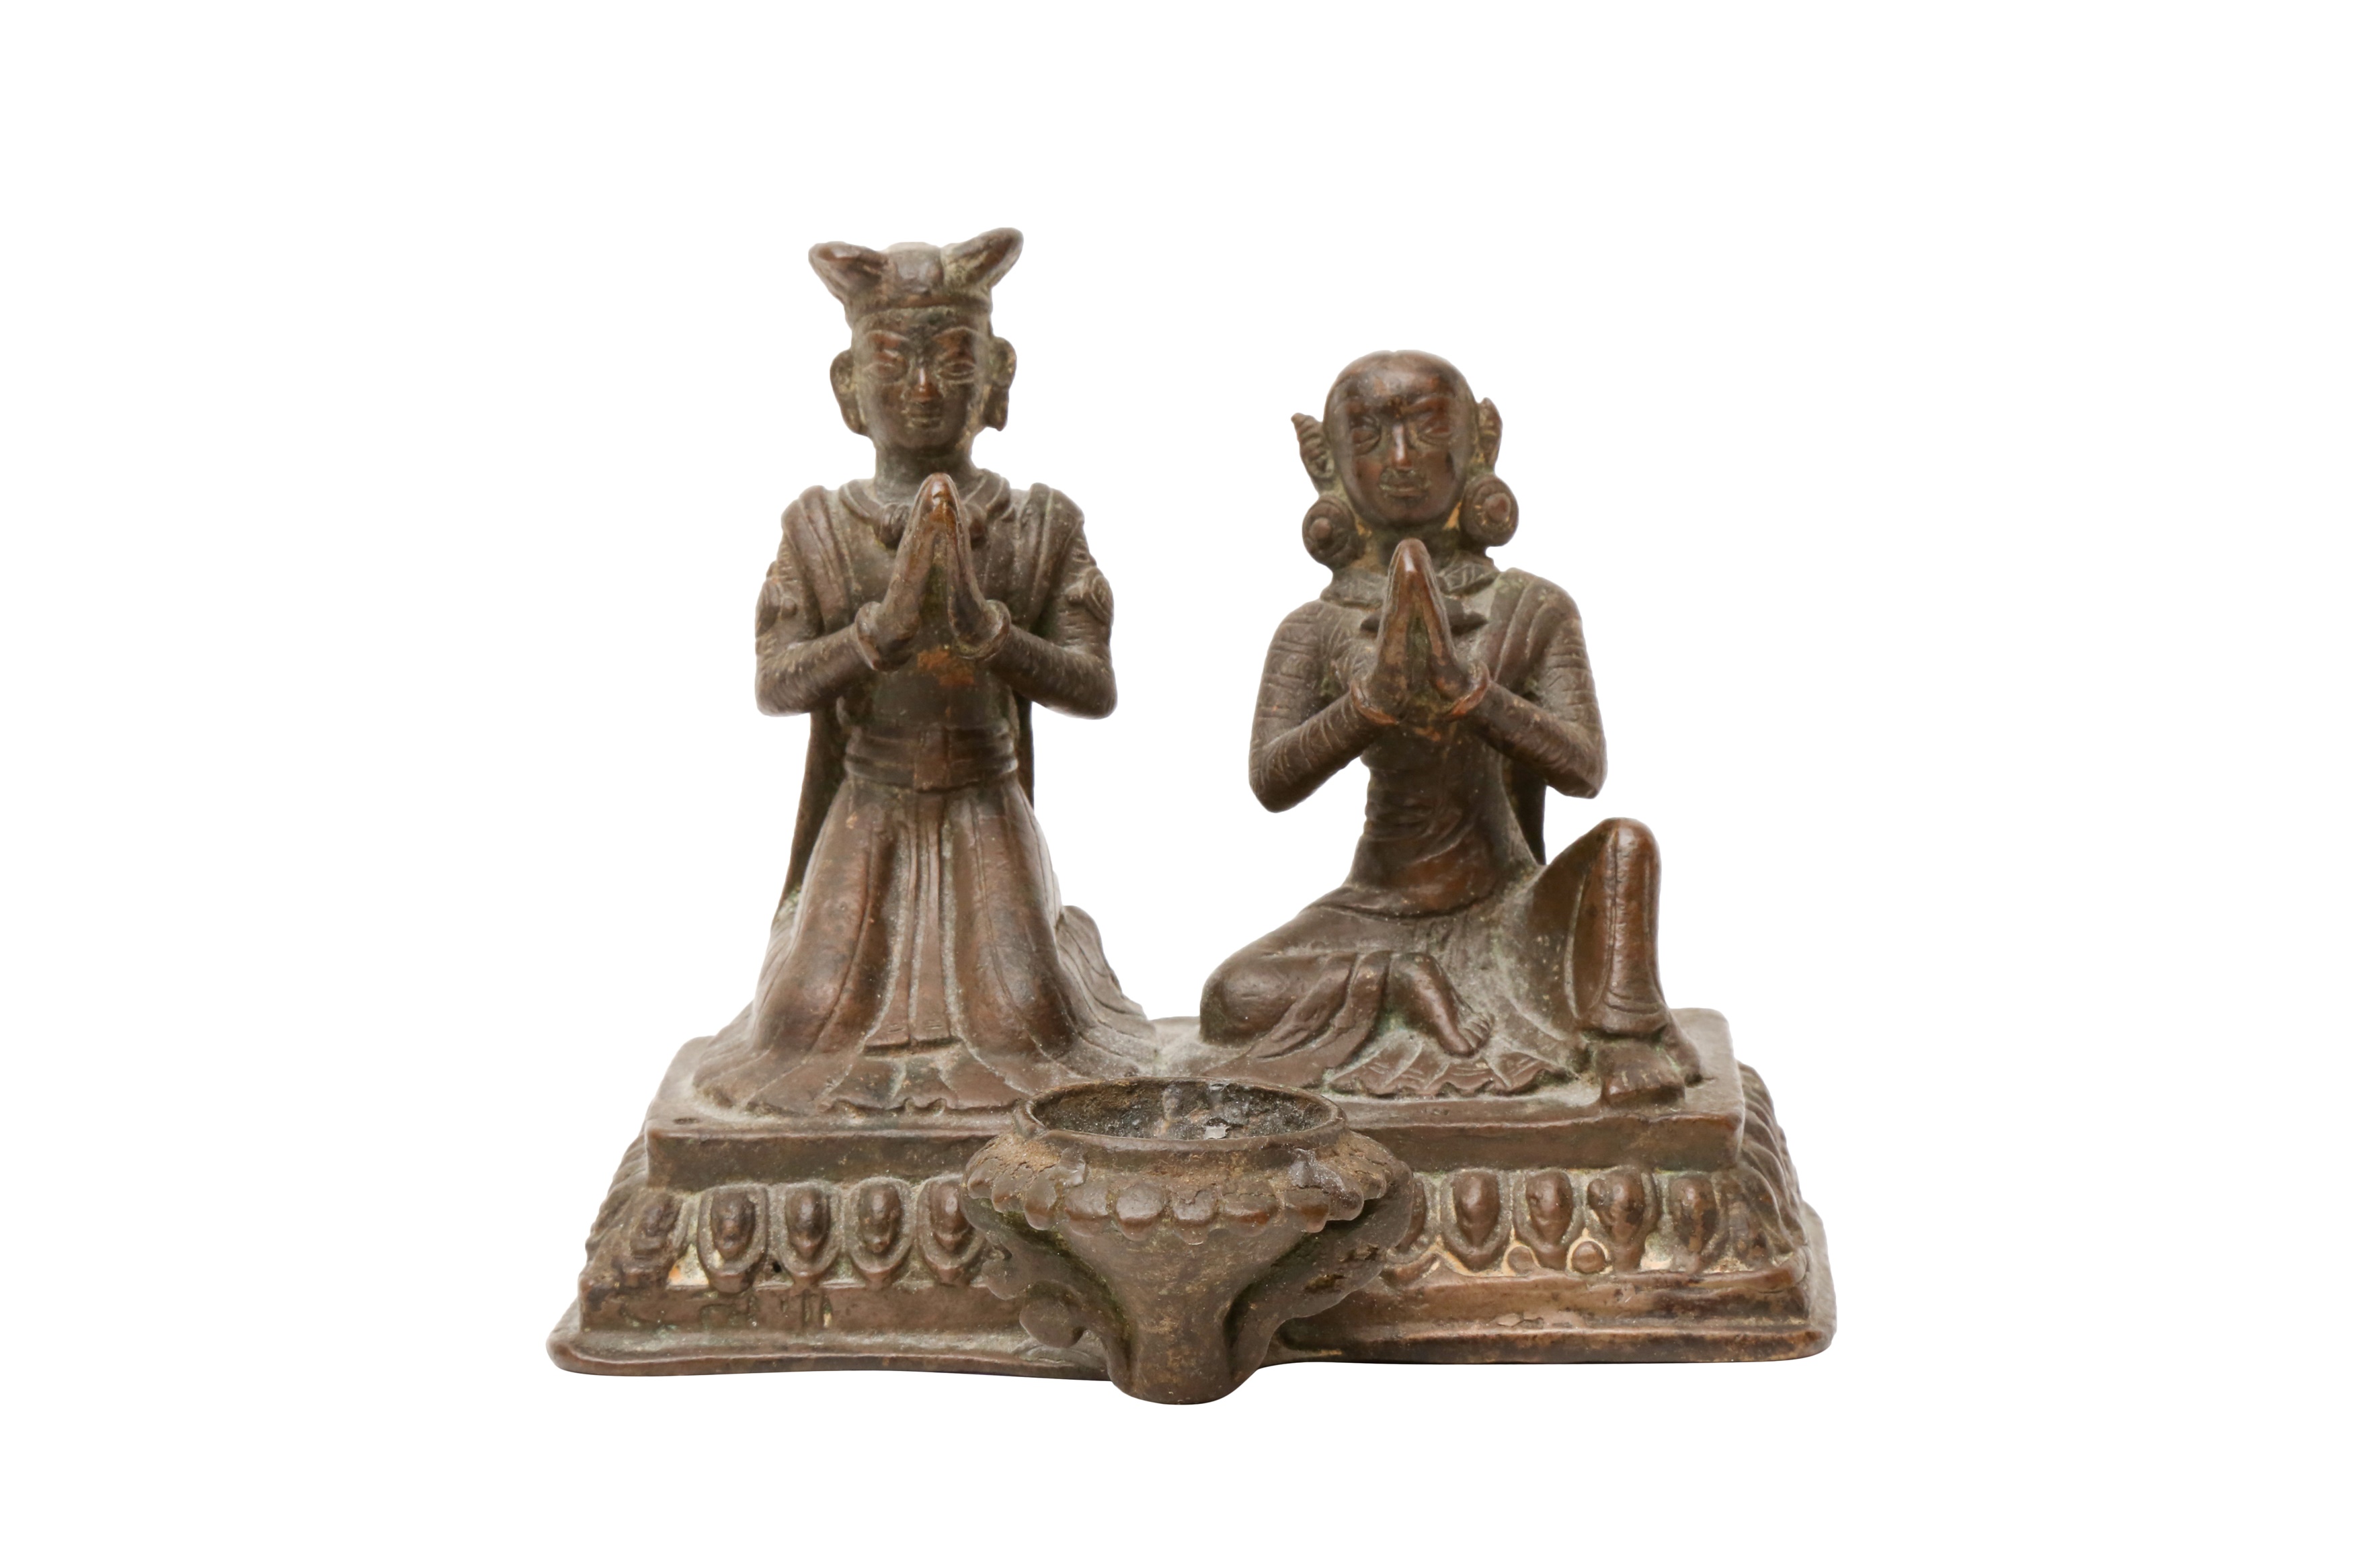 A NEPALESE BRONZE OIL 'DONORS' LAMP